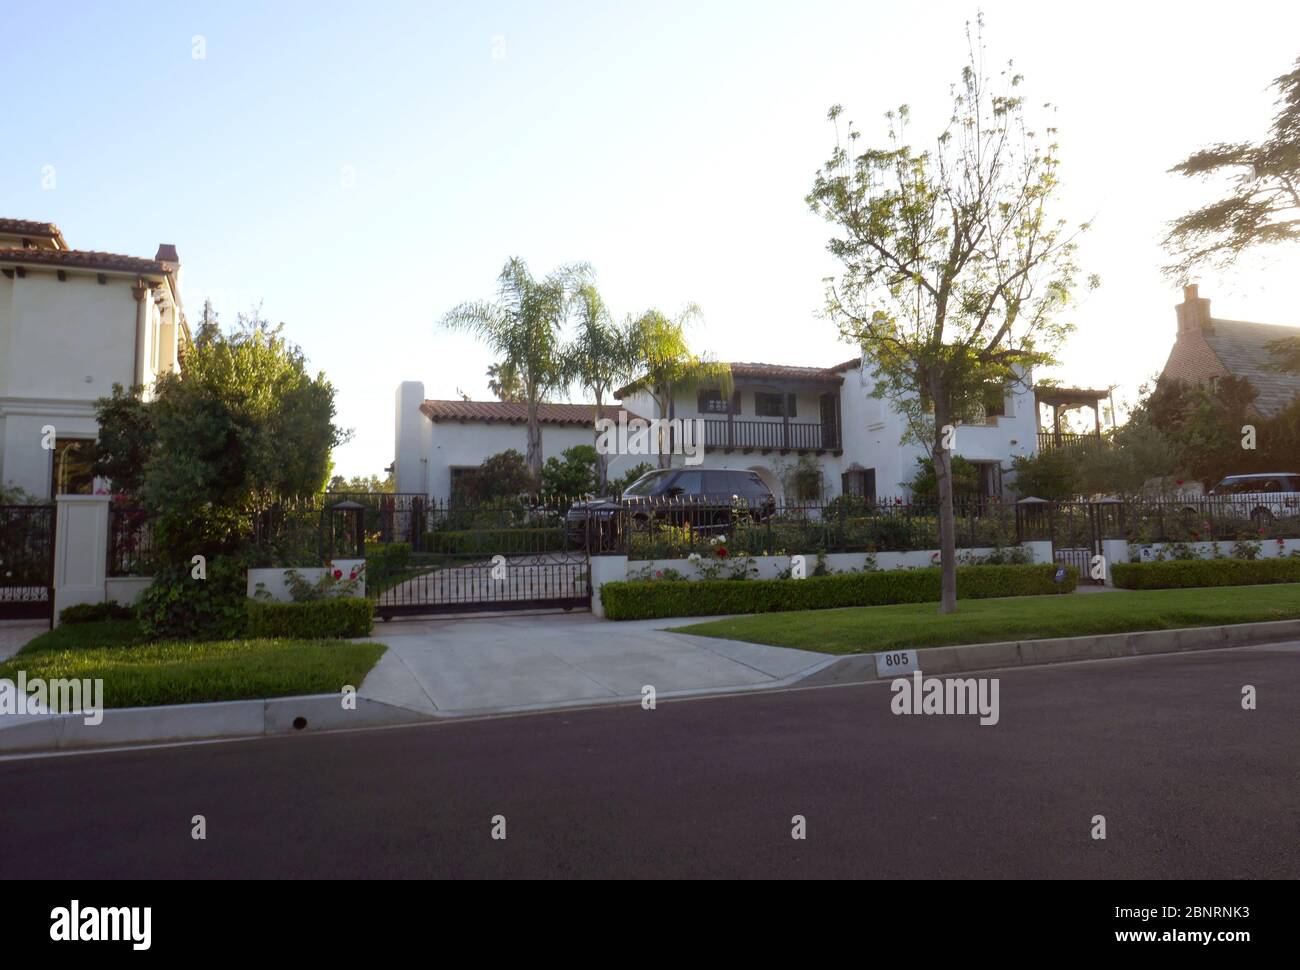 Beverly Hills, California, USA 15th May 2020 A general view of atmosphere of site of Howard Hughe's 1946 XF-11 plane crash at 805 N.Linden Drive on May 15, 2020 in Beverly Hills, California, USA. Photo by Barry King/Alamy Stock Photo Stock Photo